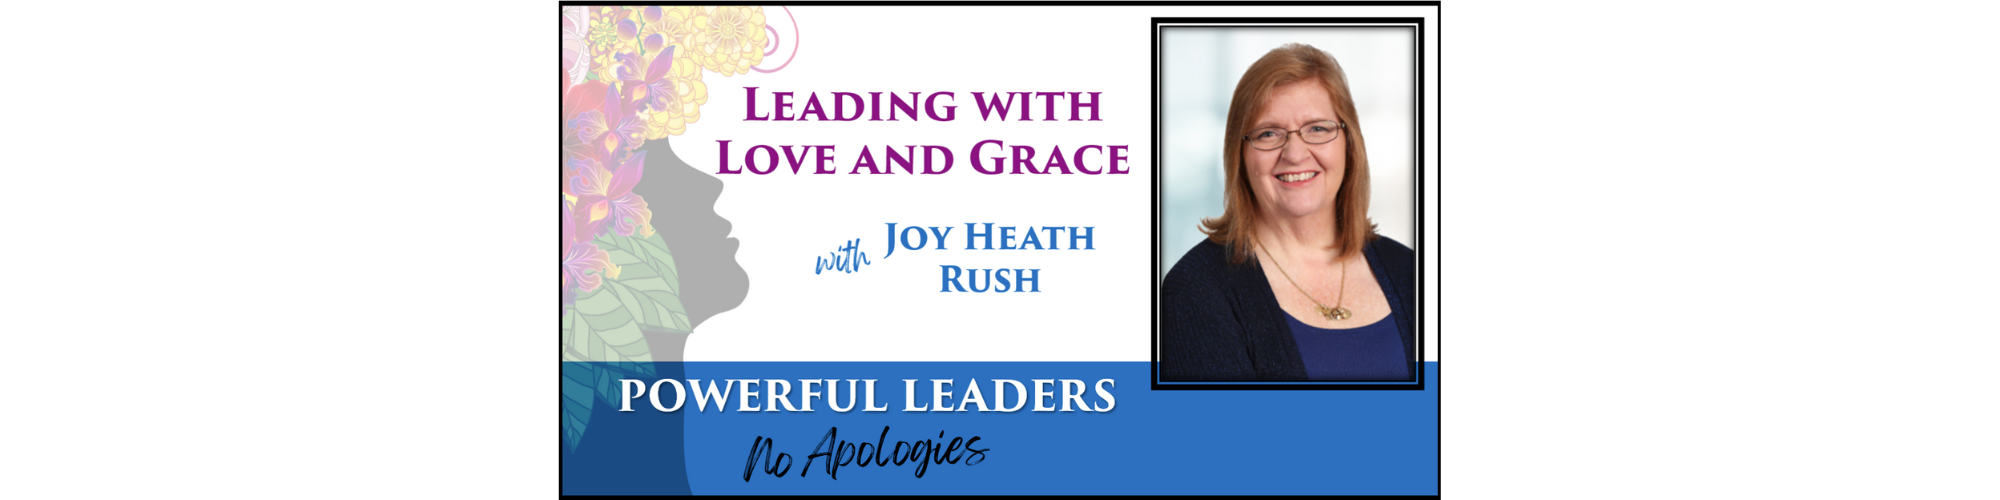 Powerful Leaders, No Apologies Episode #19 Podcast Banner